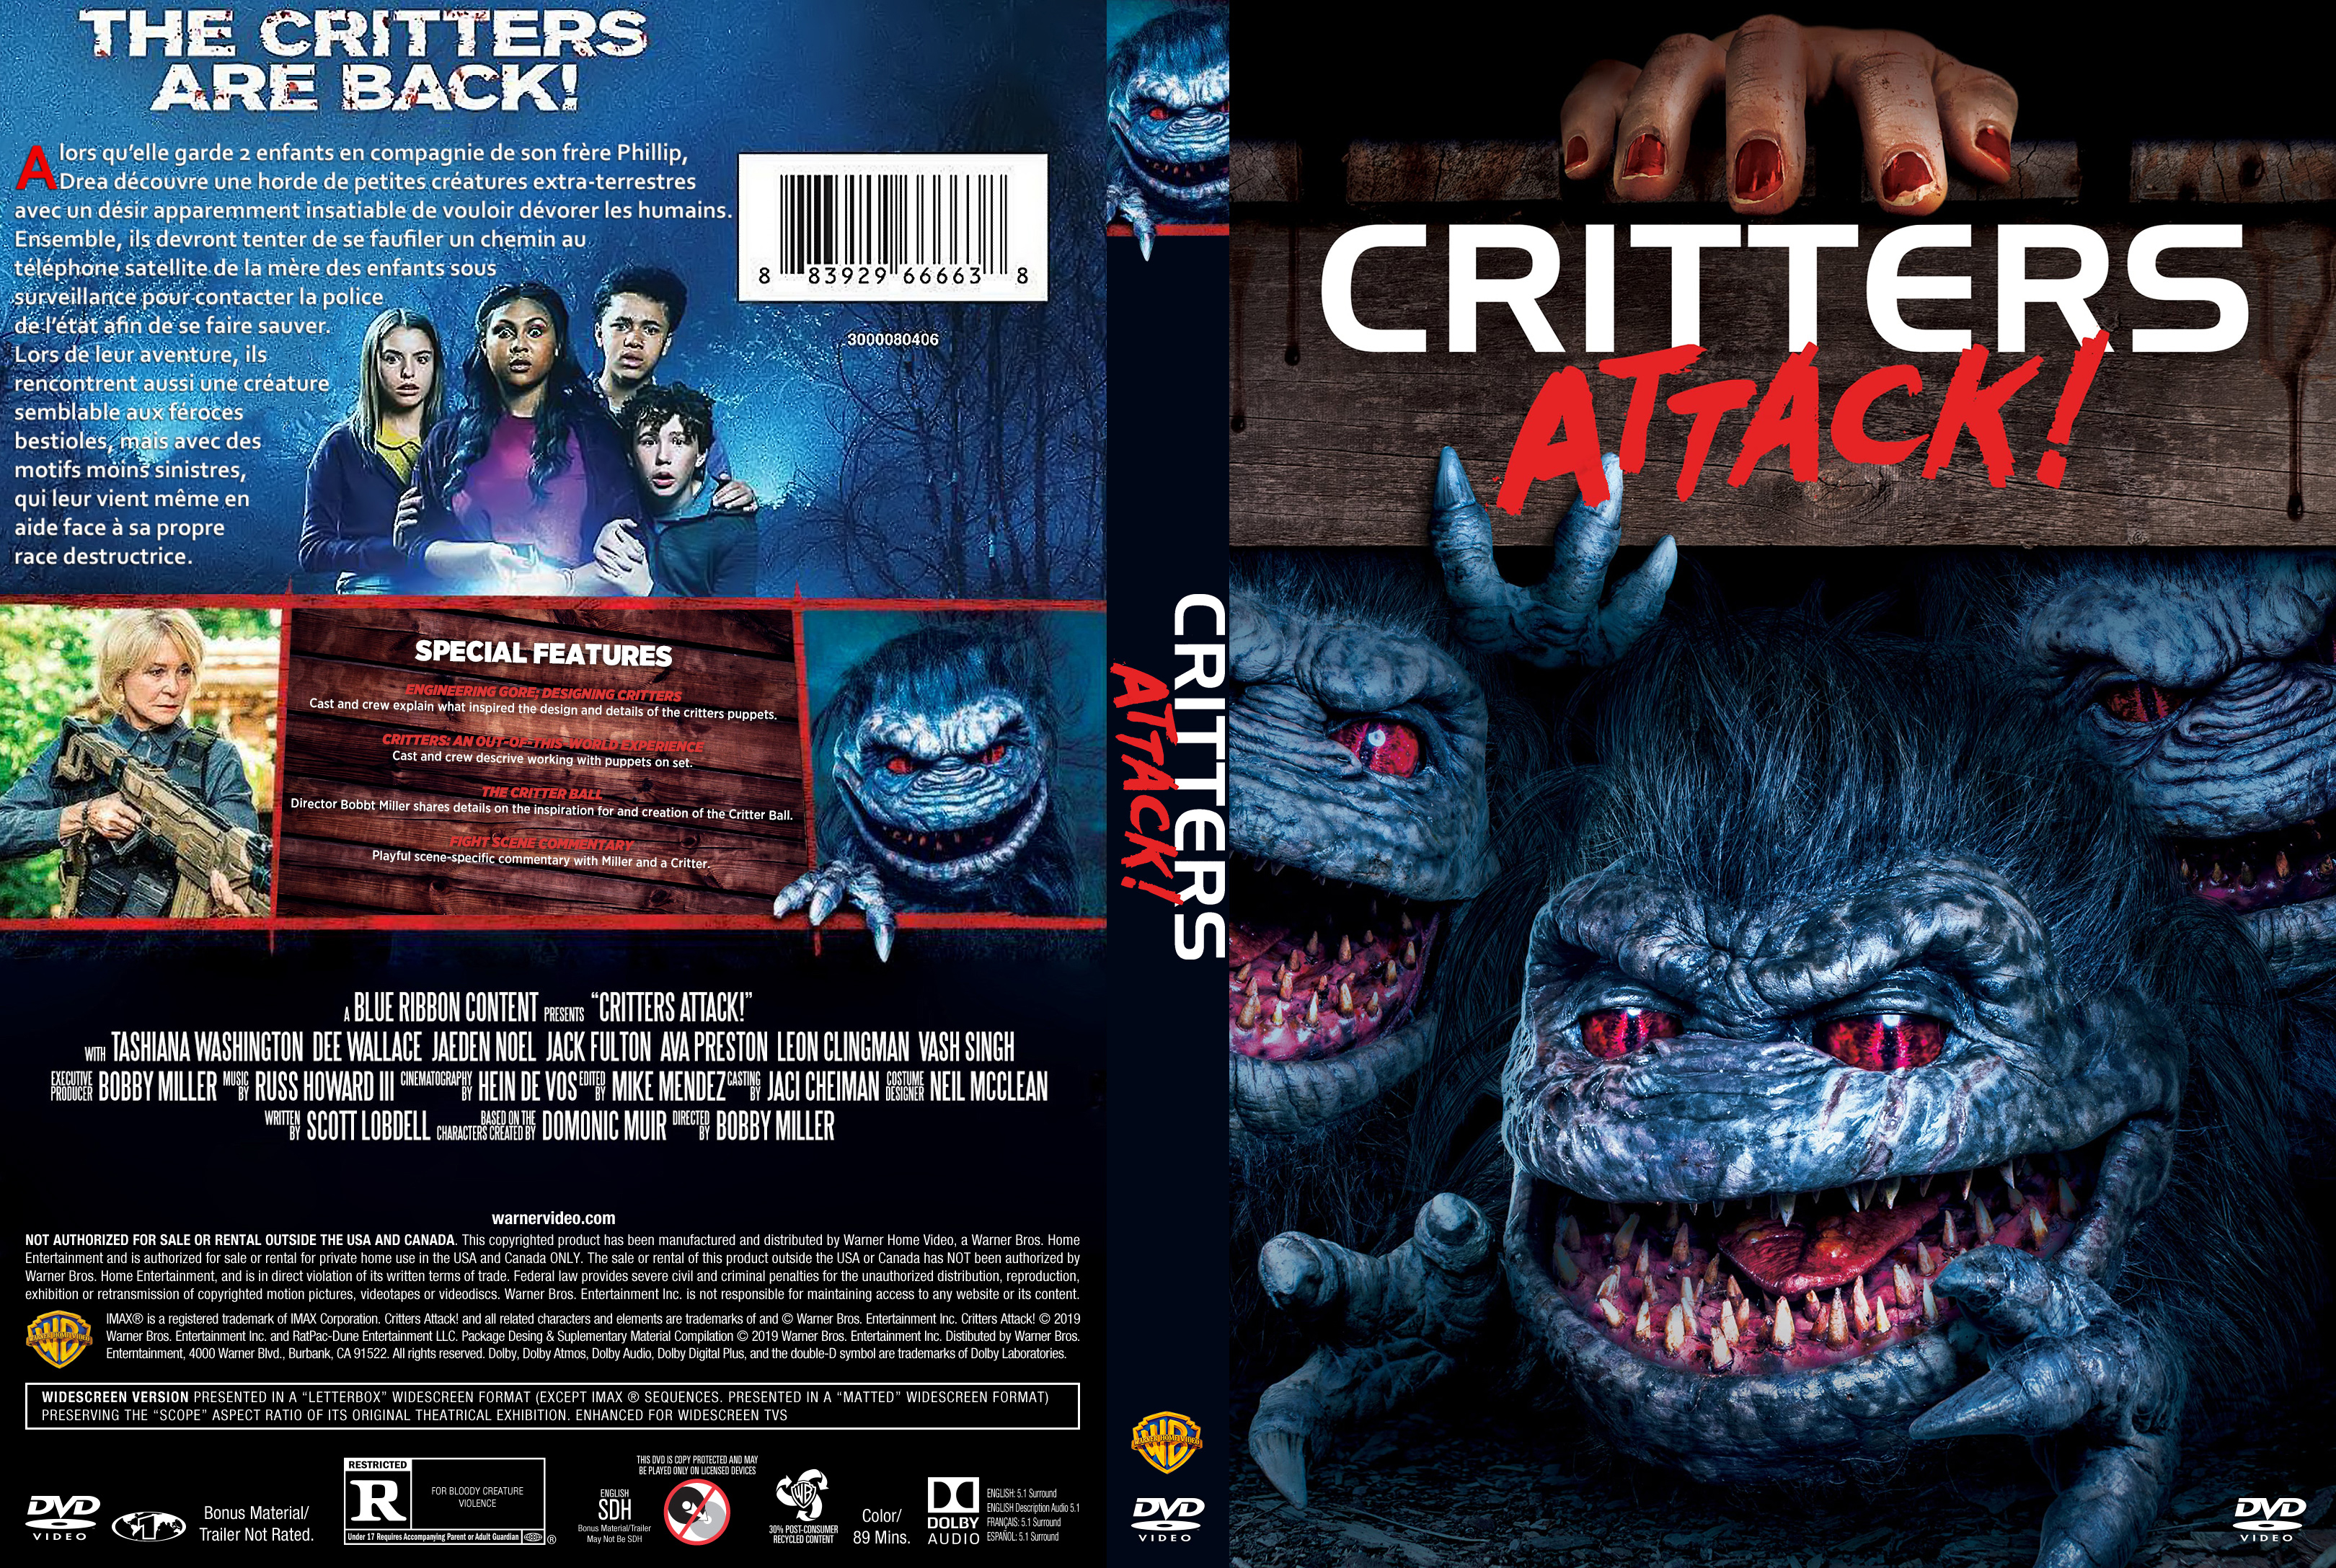 Jaquette DVD Critters 5 - Attack (Canadienne)